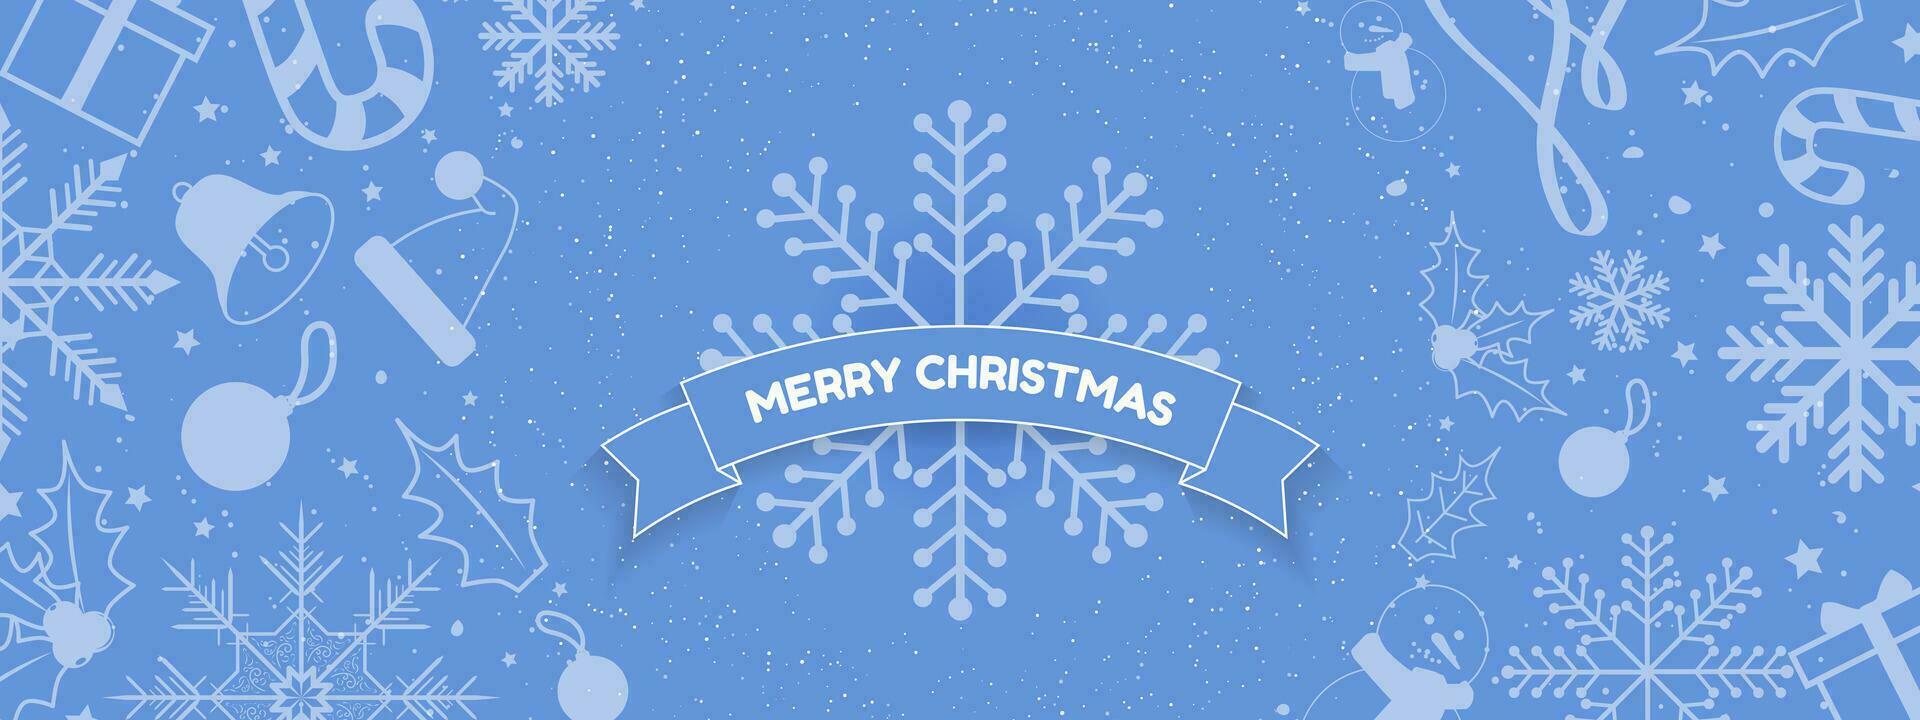 Cute Christmas Holiday Banner with ornamental snowflake and Merry Christmas text greeting on ribbon garland on Teal Blue Background decorated with snowflakes, santa hat, snowman, leaf, wreath. EPS 10. vector